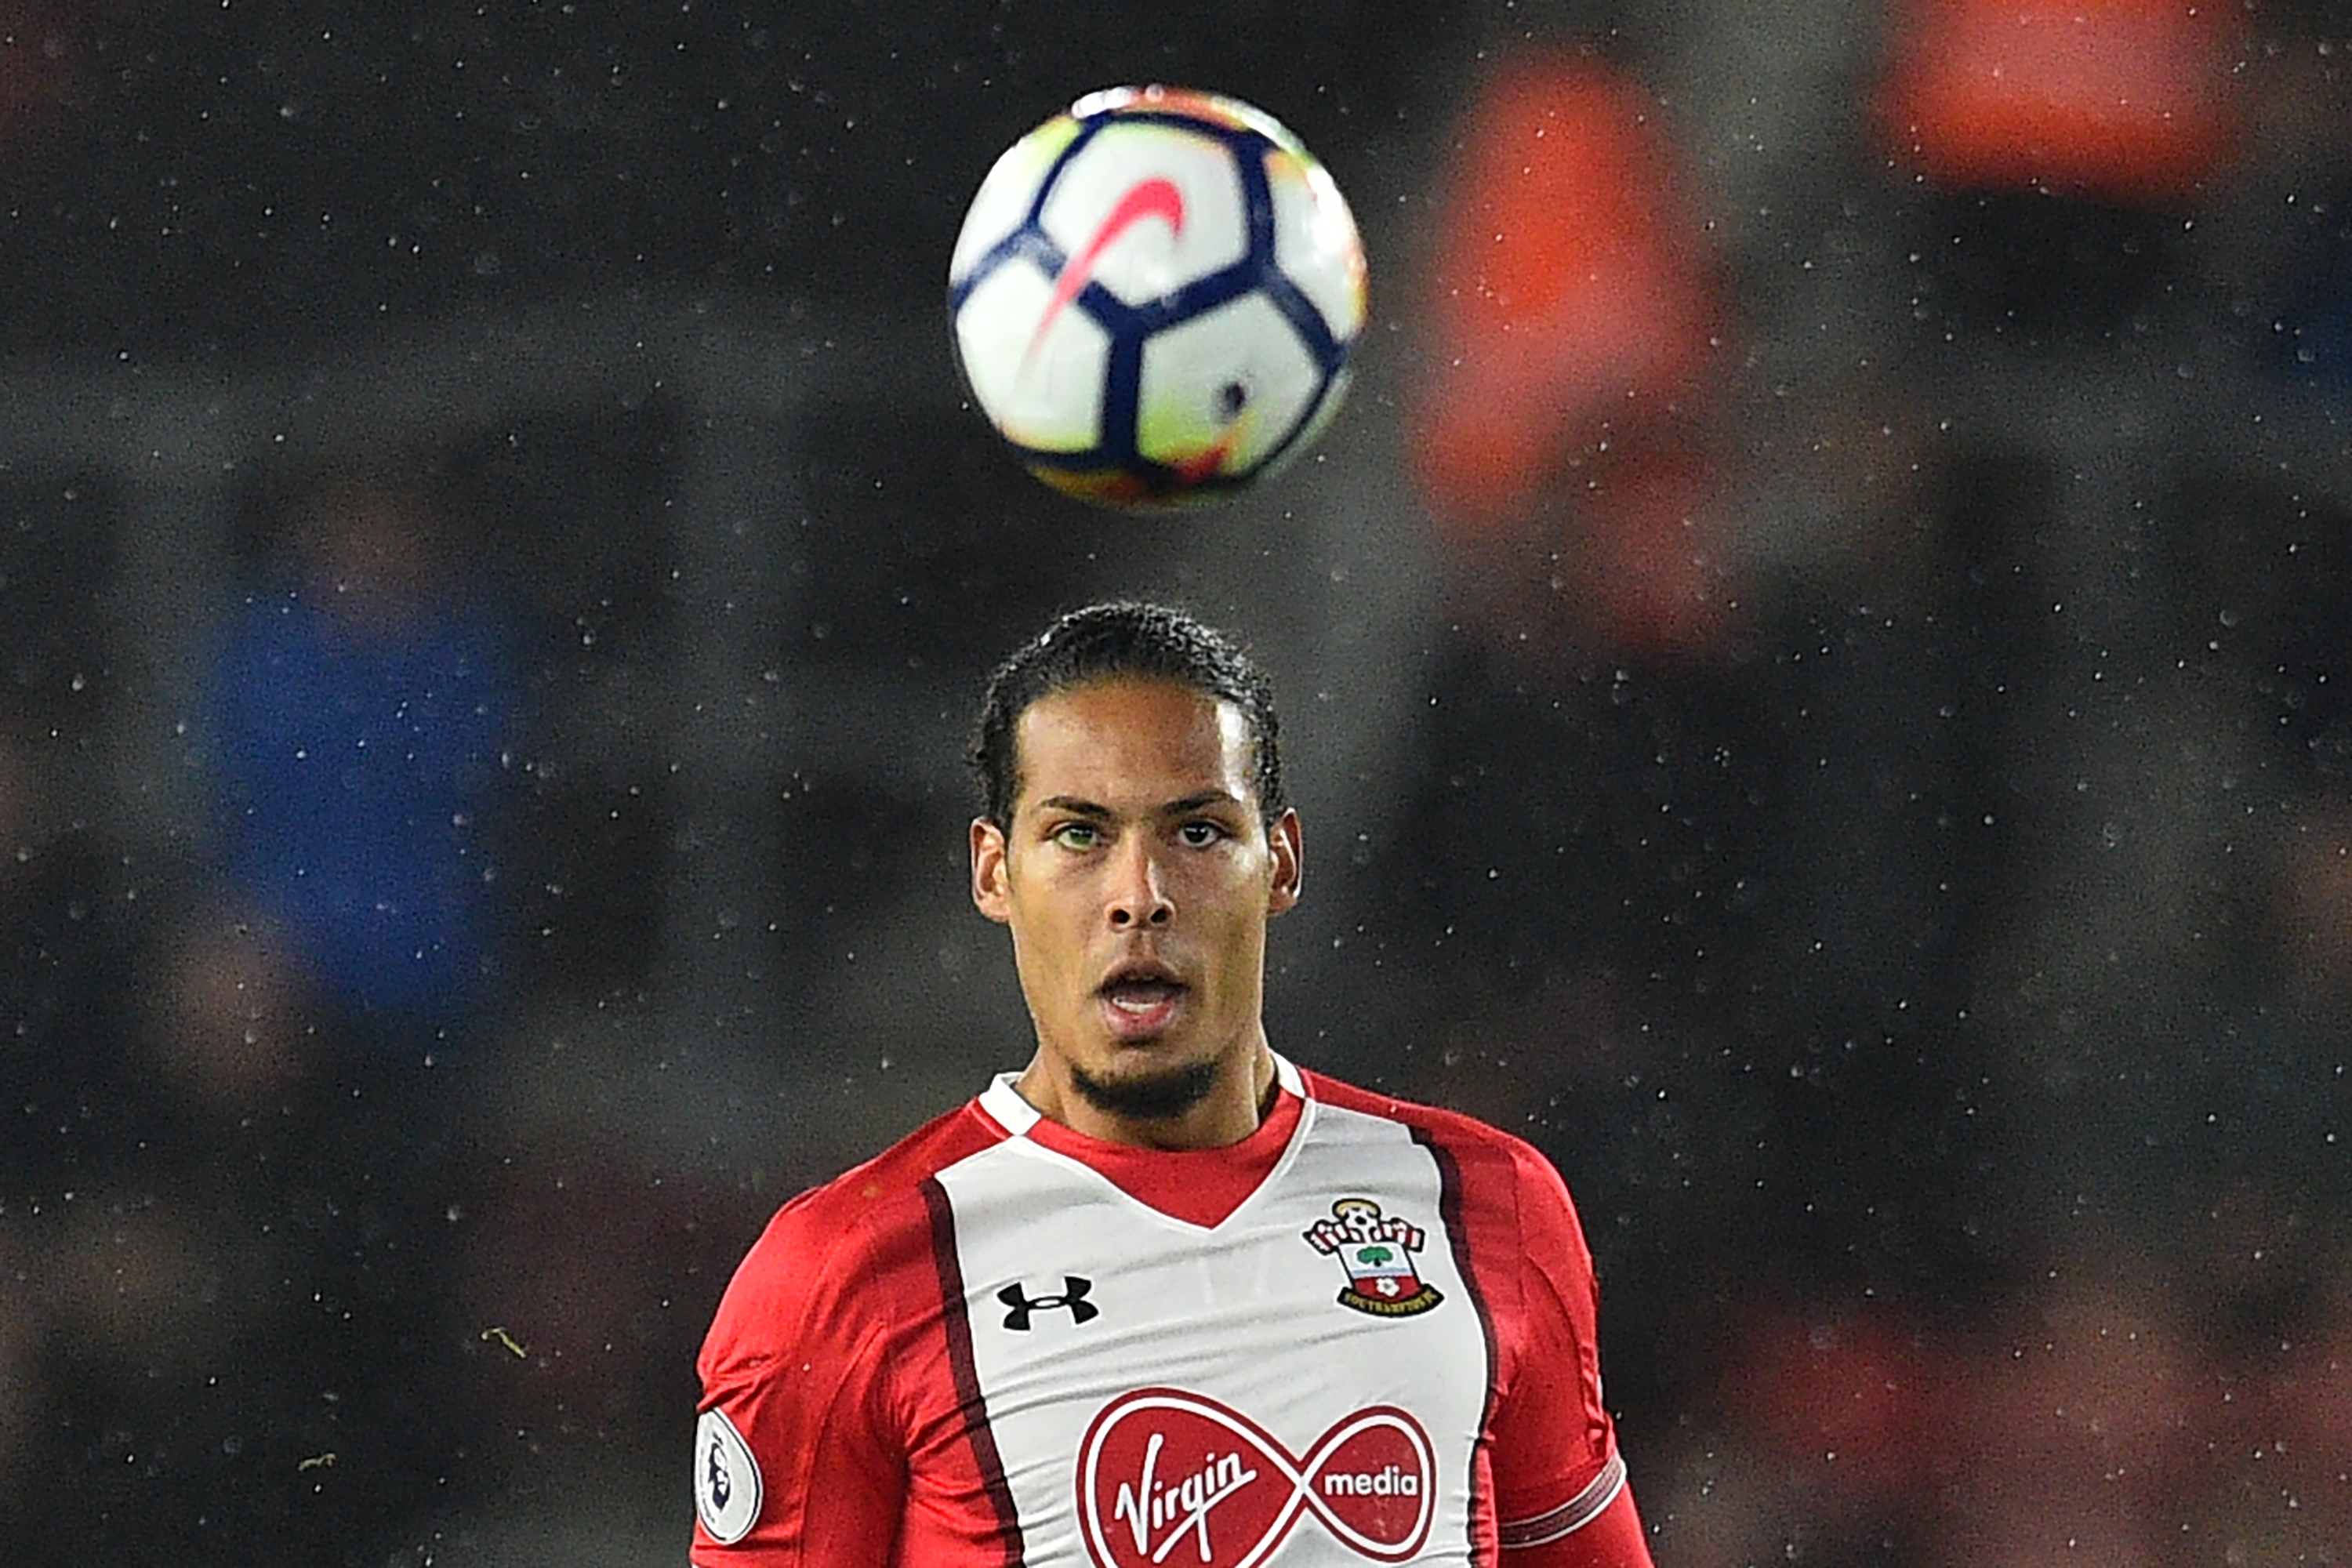 Southampton's Dutch defender Virgil van Dijk watches the ball during the English Premier League football match between Southampton and West Bromwich Albion at St Mary's Stadium in Southampton, southern England on October 21, 2017. / AFP PHOTO / Glyn KIRK / RESTRICTED TO EDITORIAL USE. No use with unauthorized audio, video, data, fixture lists, club/league logos or 'live' services. Online in-match use limited to 75 images, no video emulation. No use in betting, games or single club/league/player publications.  /         (Photo credit should read GLYN KIRK/AFP/Getty Images)